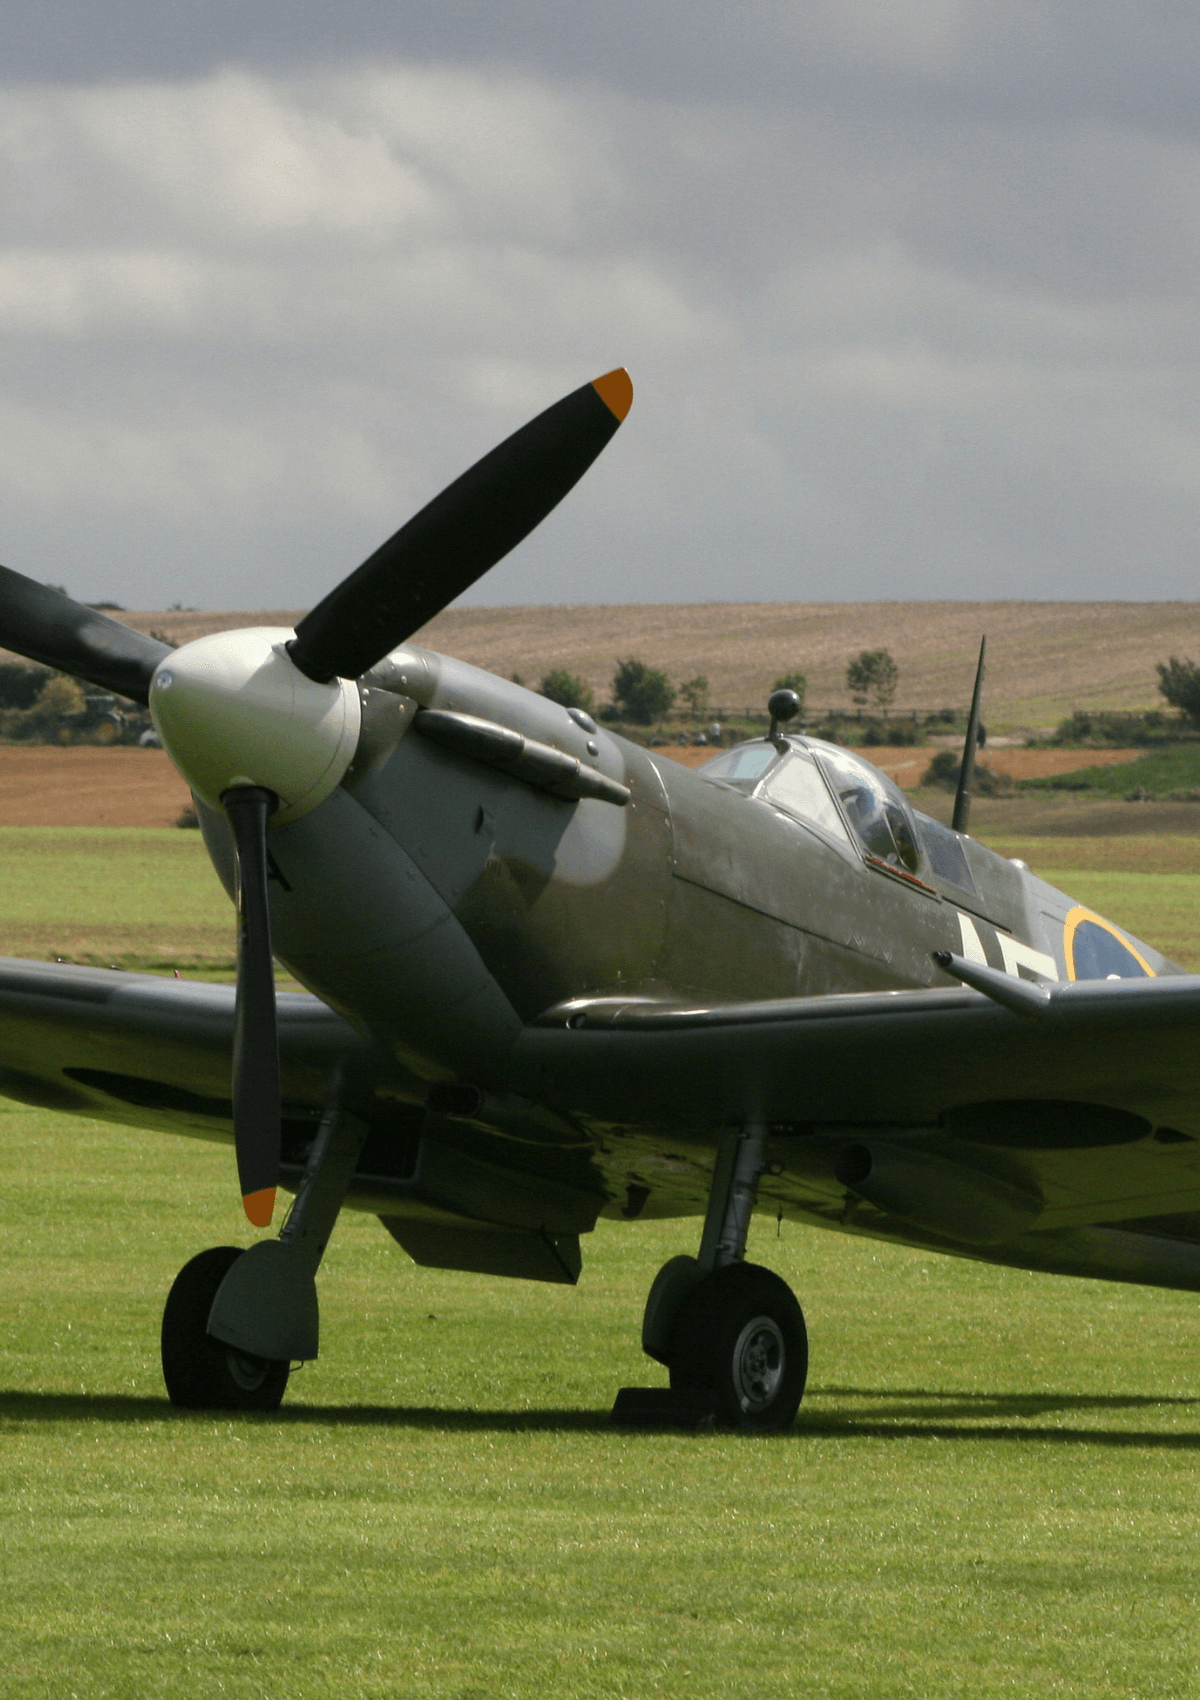 A plane at the Imperial War Museum in Duxford, England